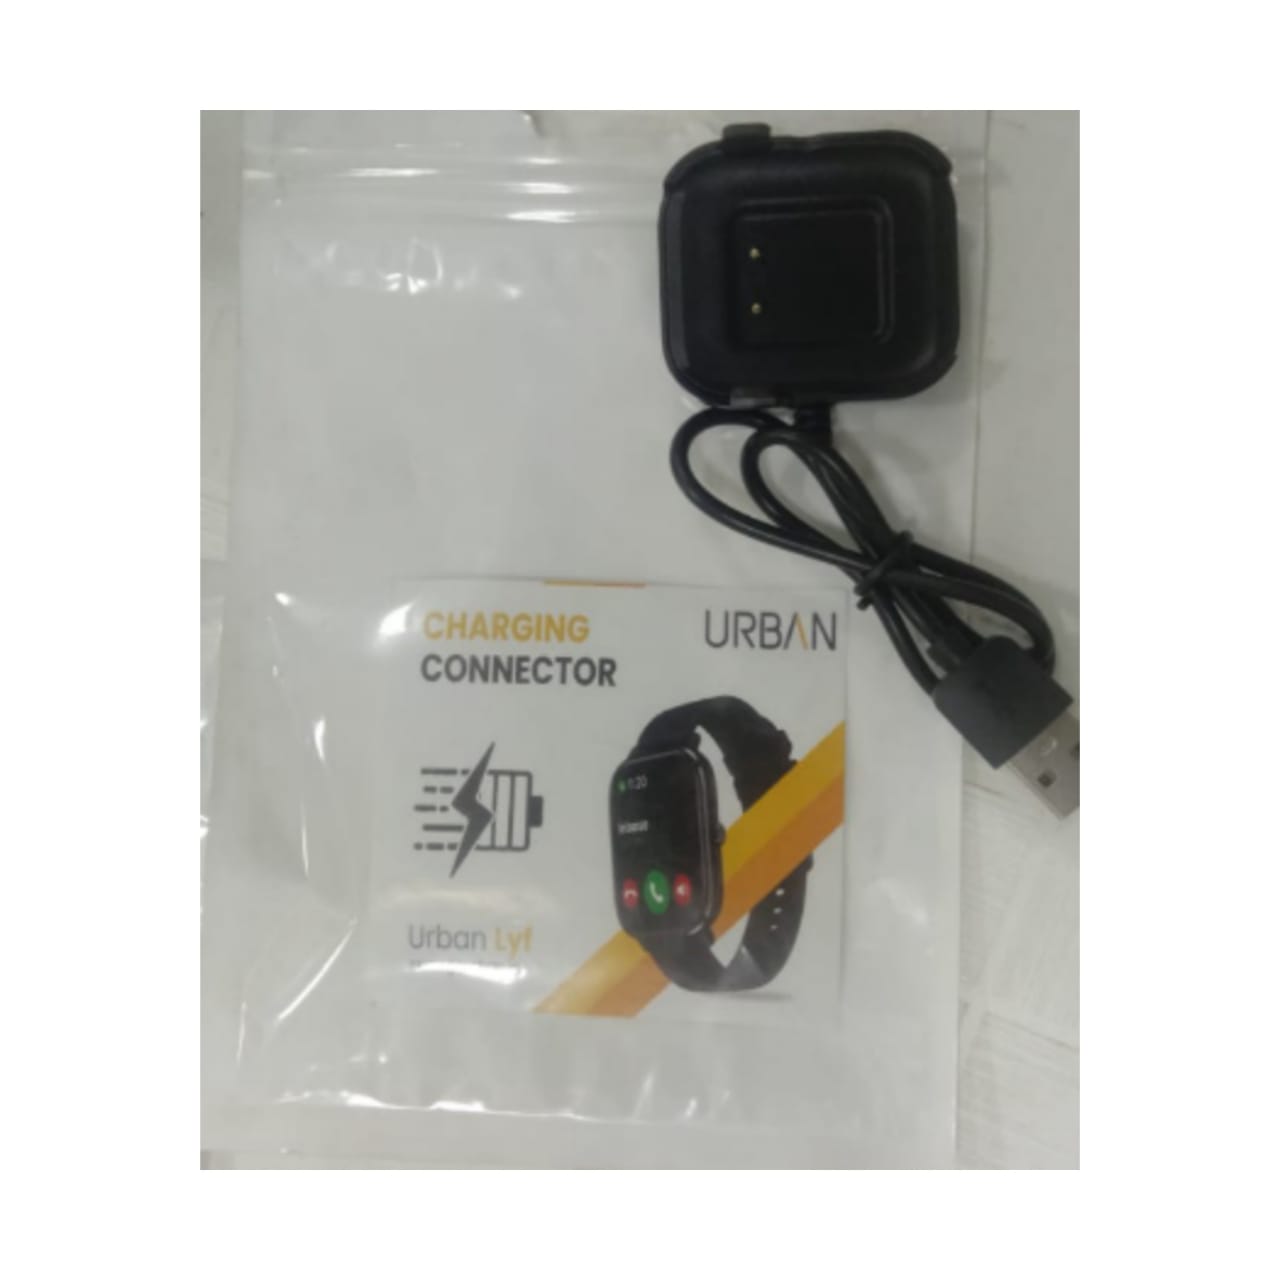 Urban lyf smart watch charger |charging connector